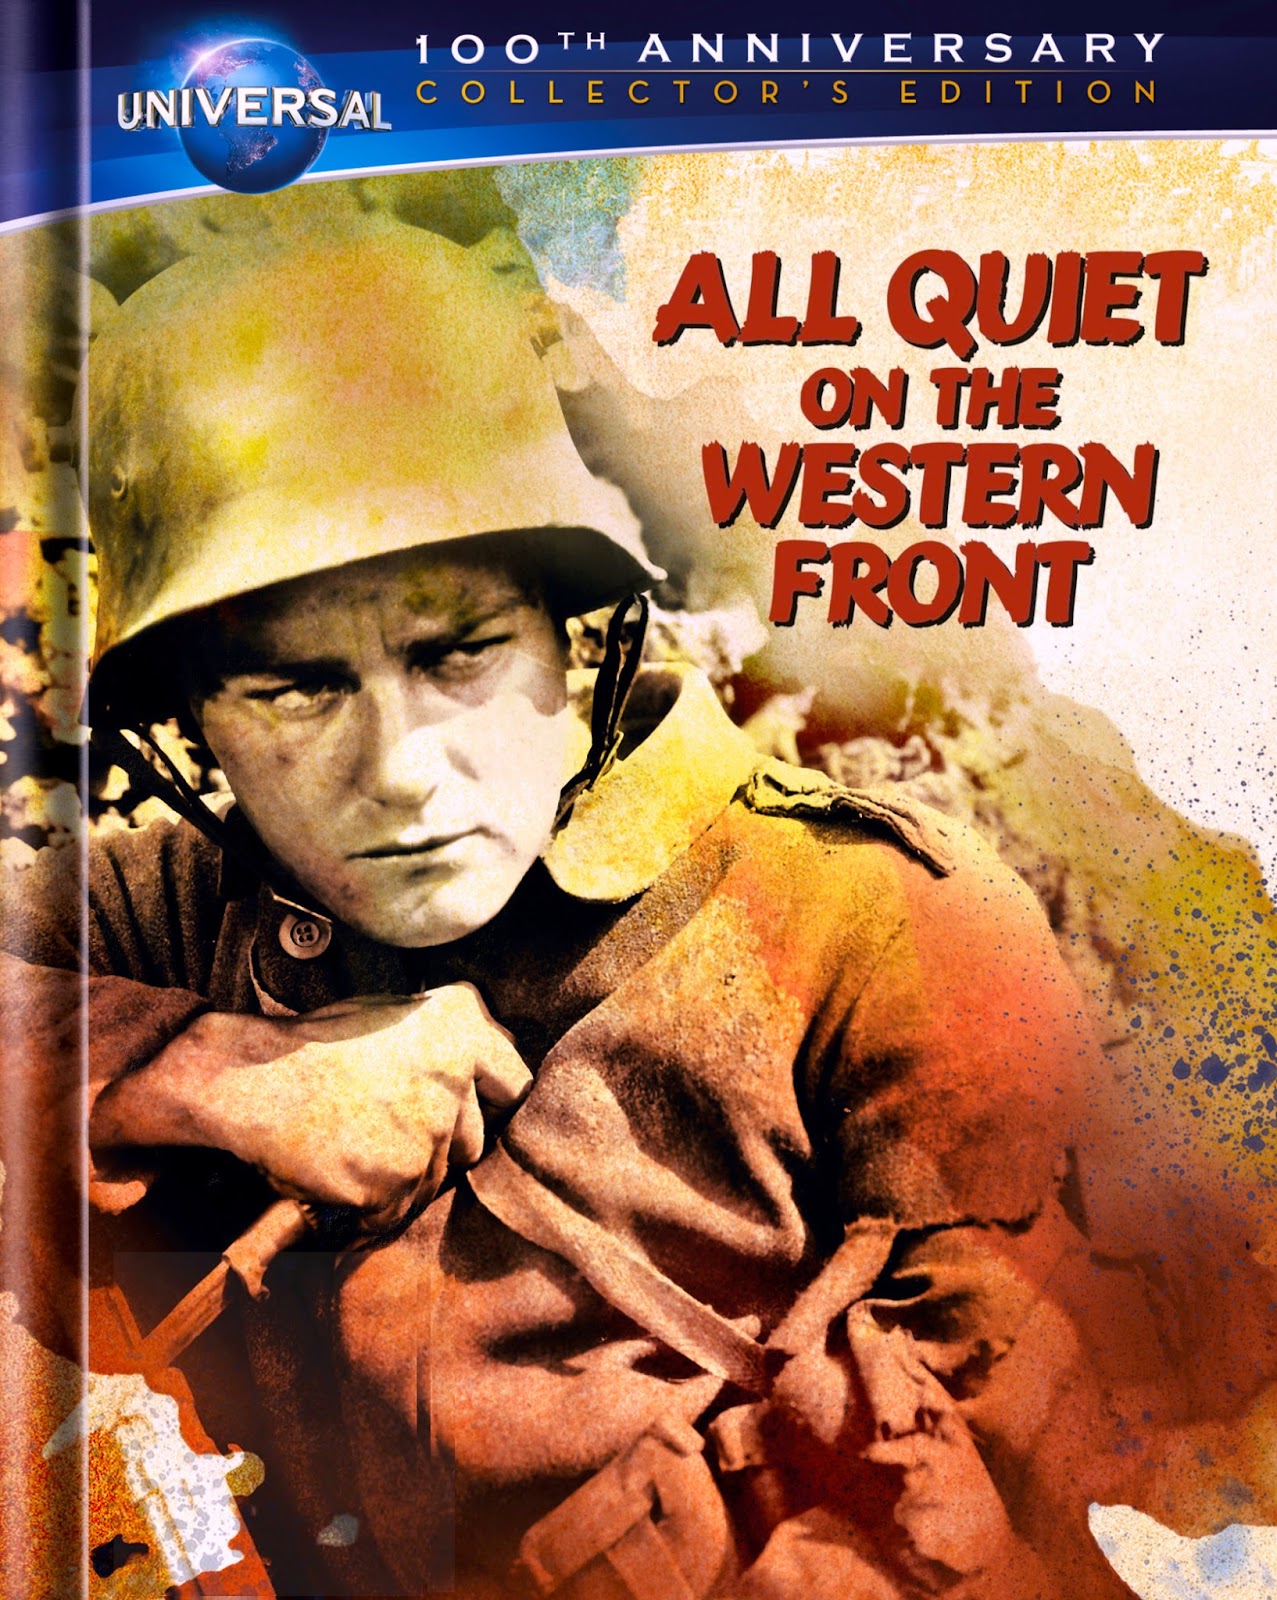 An Analysis of All Quiet on the Western Front, a Movie